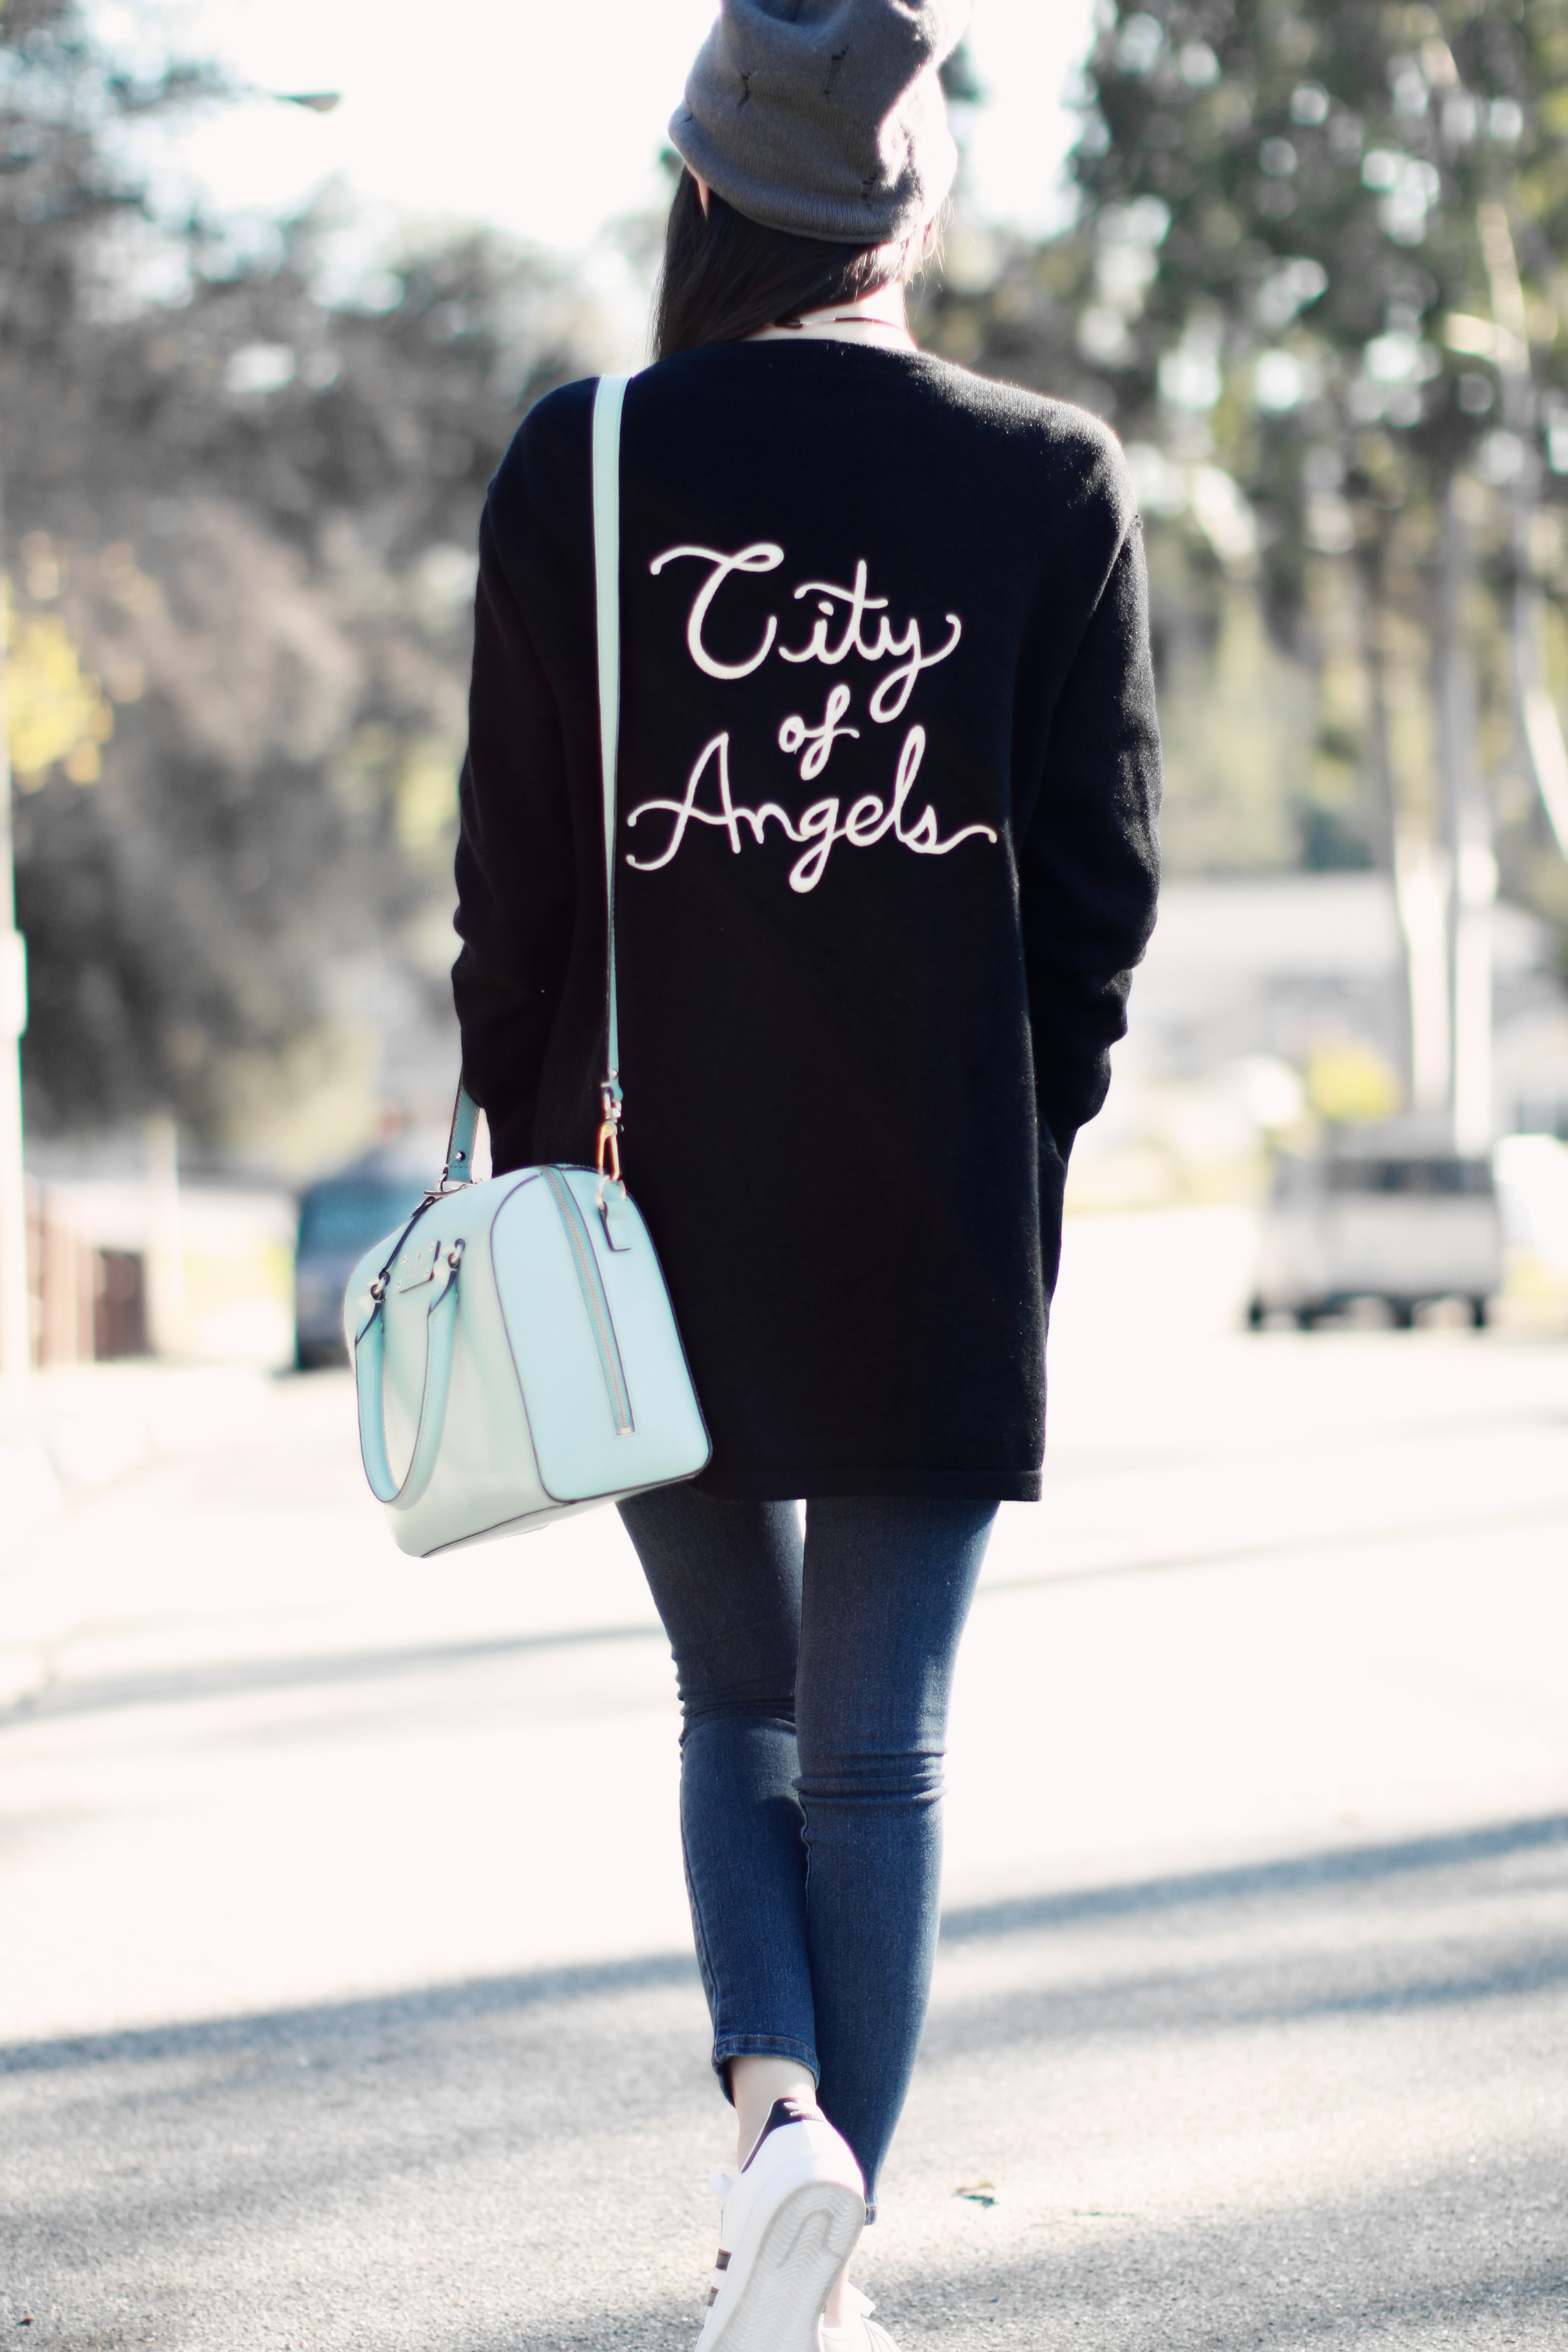 1749-ootd-fashion-embroidered-cardigan-los-angeles-city-of-angels-adidas-forever21-winterfashion-outfitoftheday-clothestoyouuu-elizabeeetht